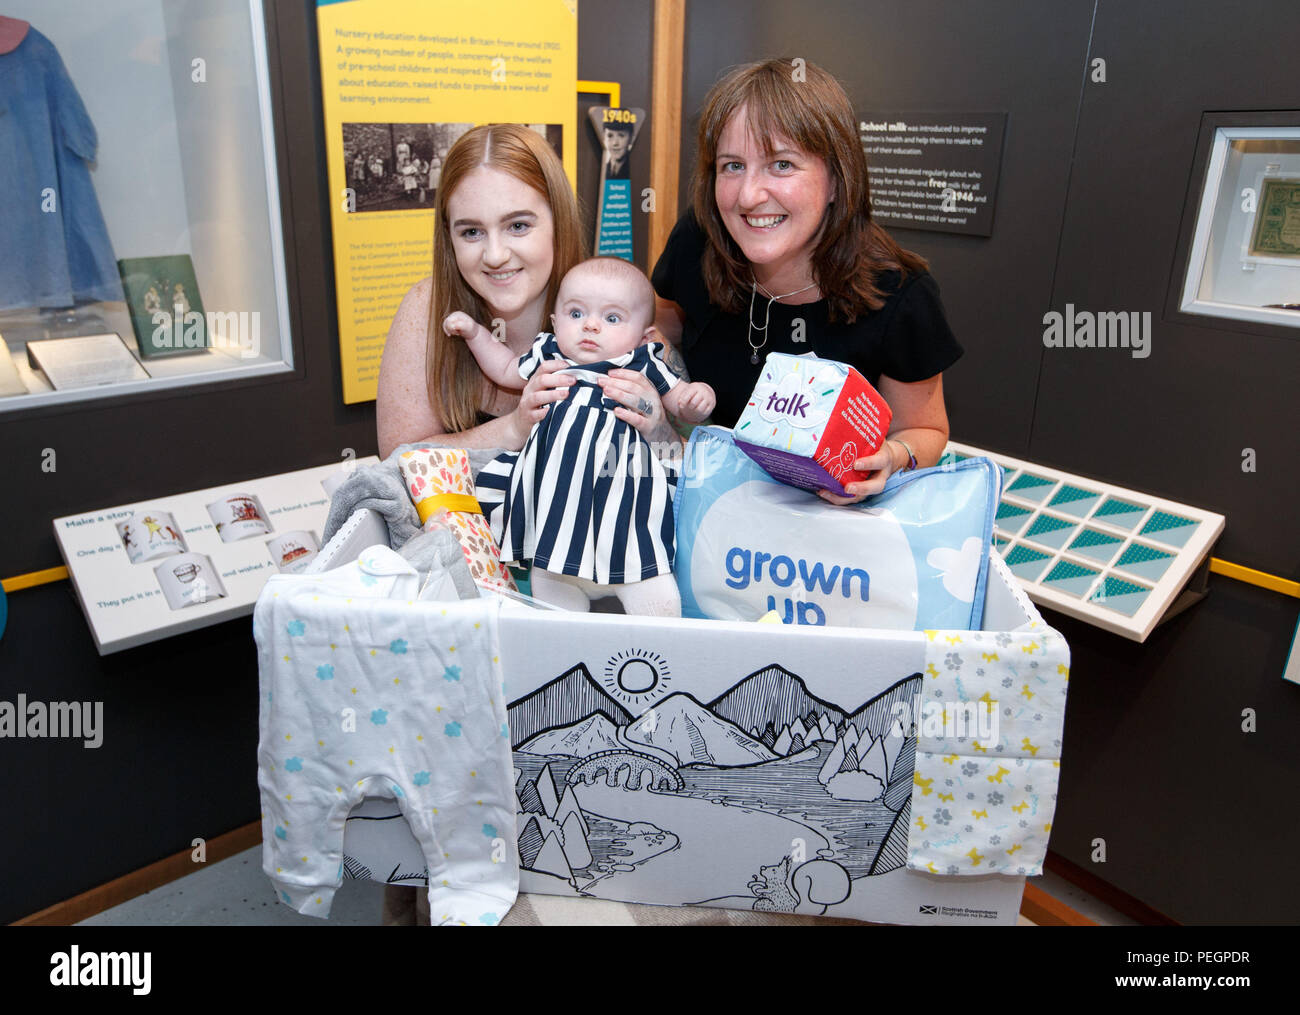 Maree Todd (right), Minister for Children and Young People, with Jennifer Scott and her daughter Hailie who received the box, marks the first anniversary of the Baby Box initiative at the Museum of Childhood as one of the boxes is to be preserved in history as an exhibit at the Edinburgh attraction. Stock Photo